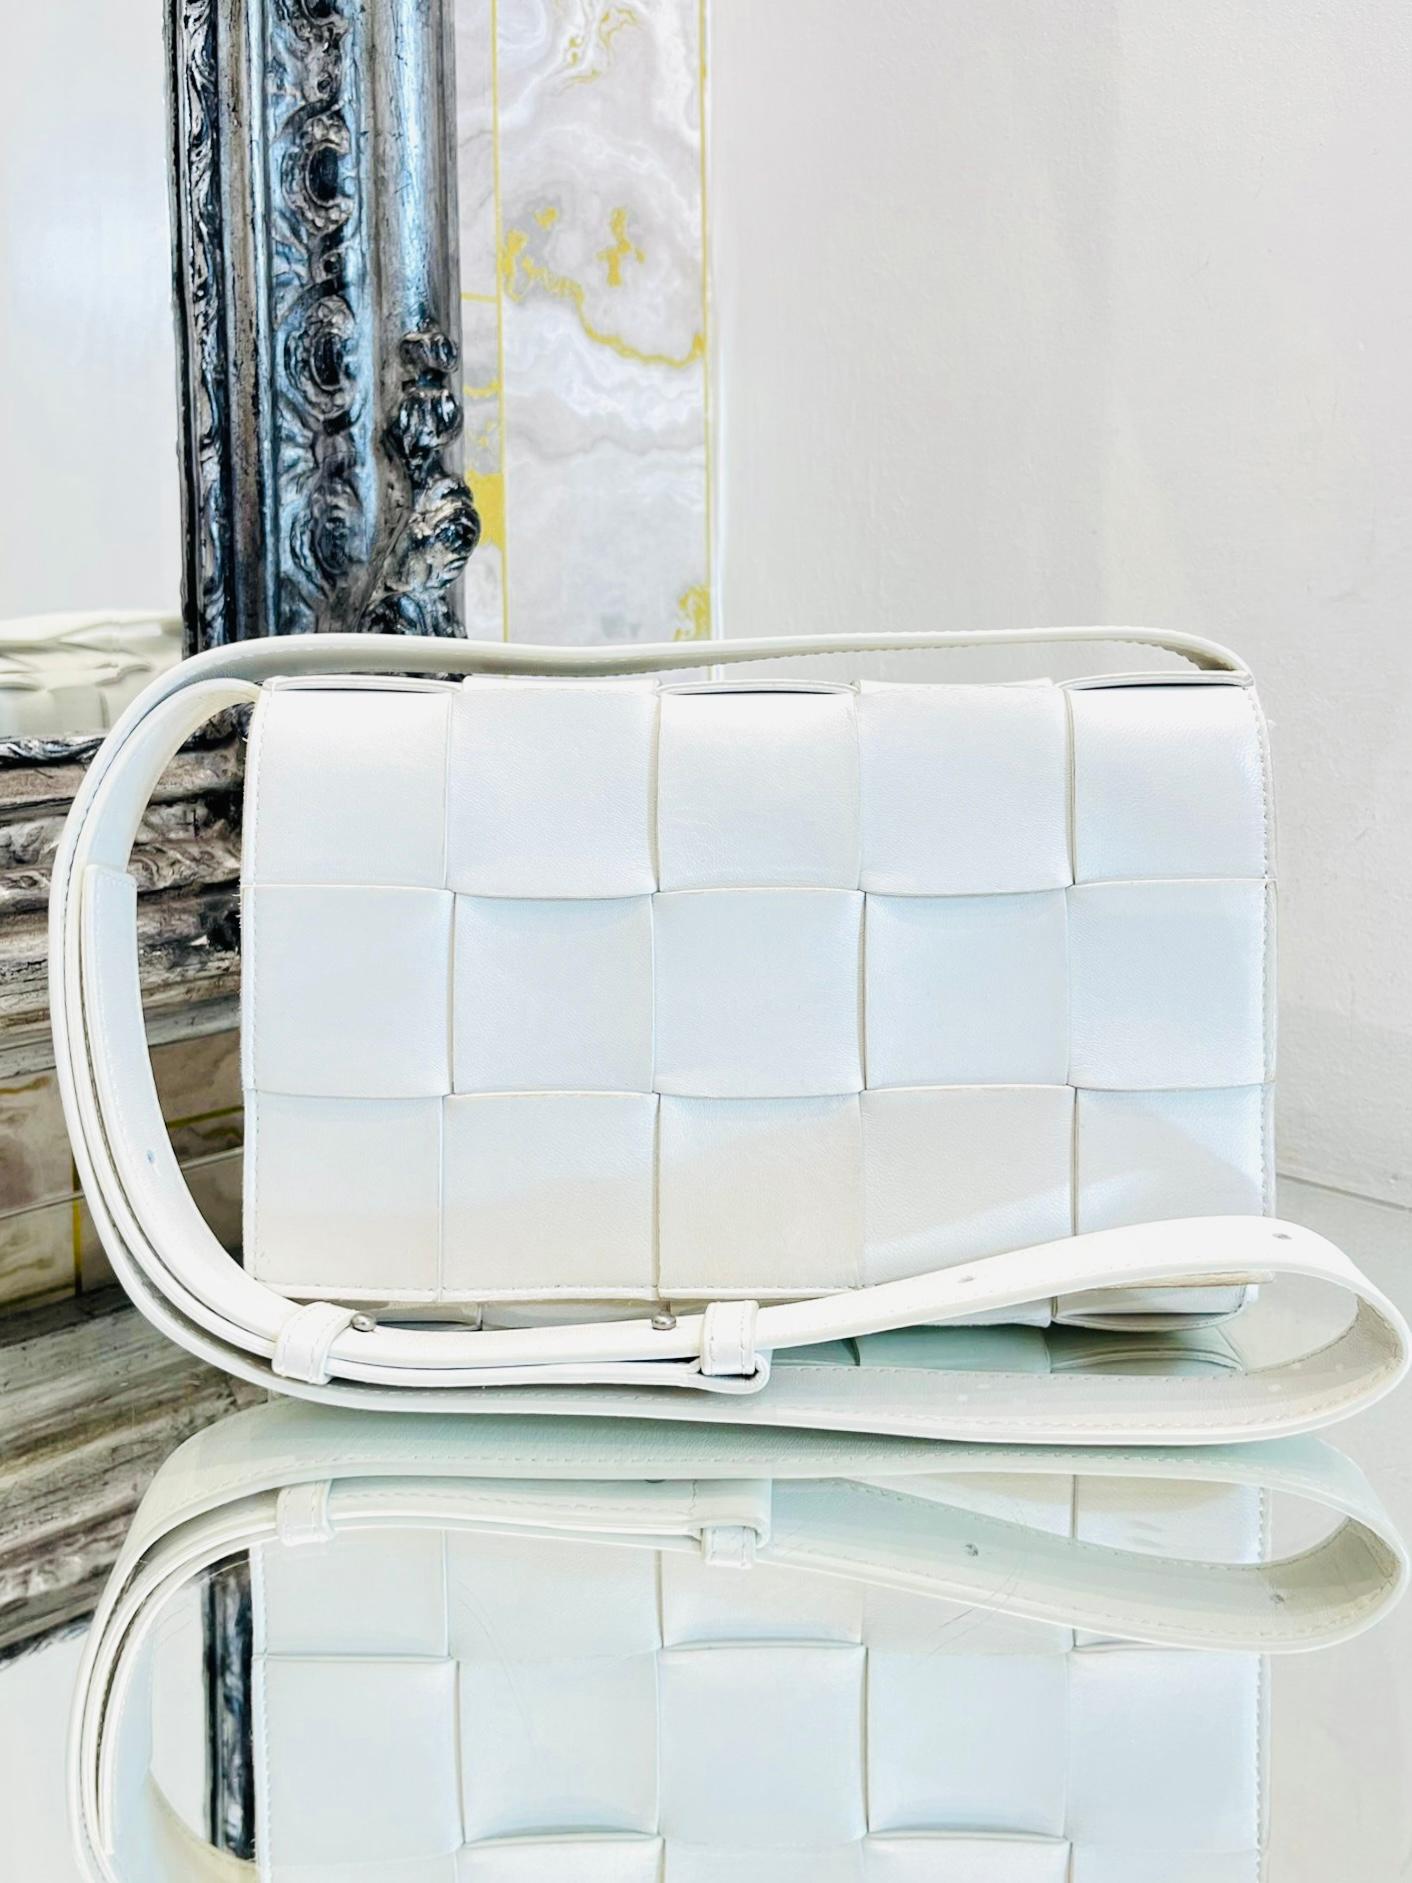 Bottega Cassette Crossbody Leather Bag

Current Season - White bag with signature leather weave.

Maxi weave strips to the flap bag, magnetic closure and adjustable

shoulder strap. Rrp £2,000

Size - Height 15cm, Width 23cm, Depth 5cm

Condition -